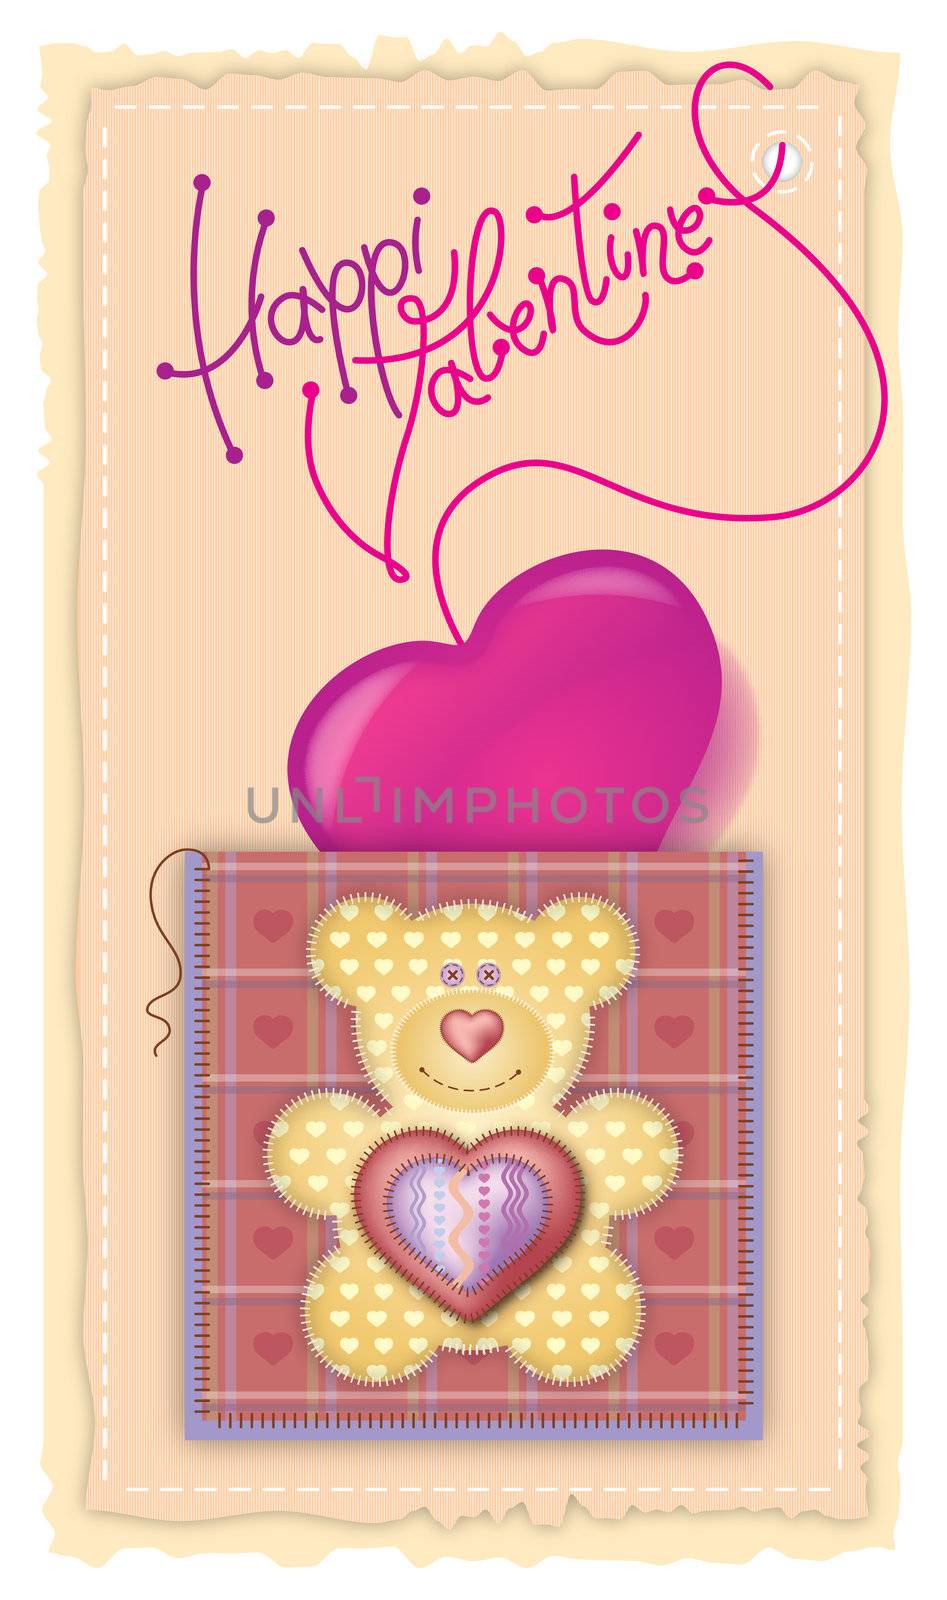 Greeting Card Valentine's Day. Merry embroidered teddy bear with a heart on his chest